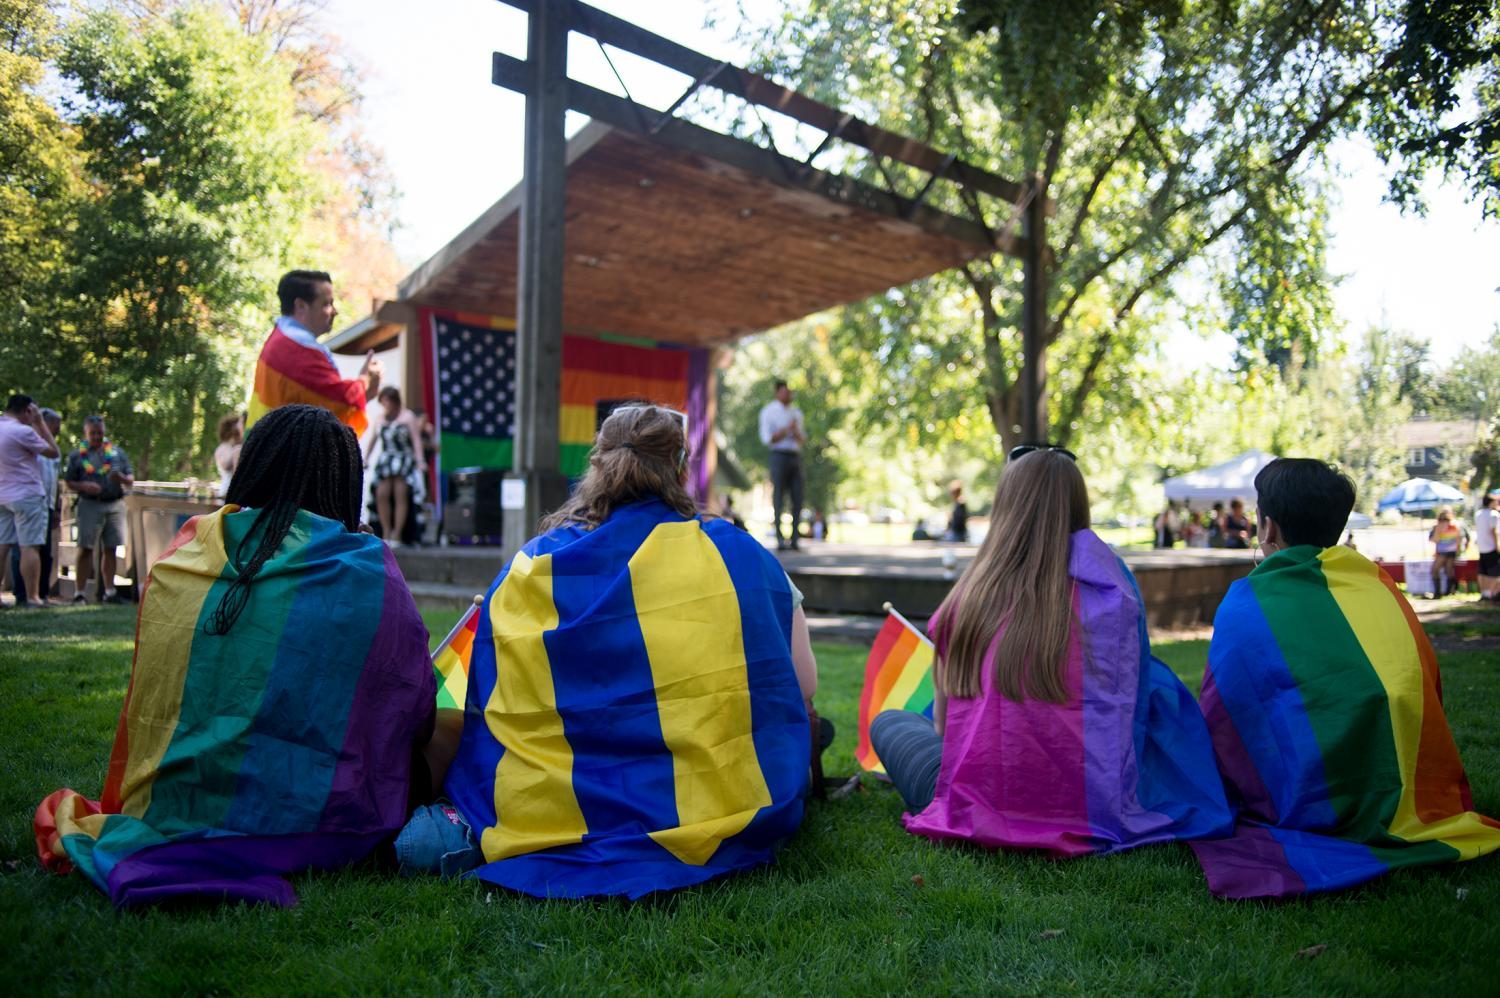 Pride march attendees listen to Mathew Southerland, a WSU student democrat who is running for congress against Cathy McMorris Rogers, speak about how he will help the LGBTQ community in Whitman County Saturday at the Palouse Pride Festival in Moscow.